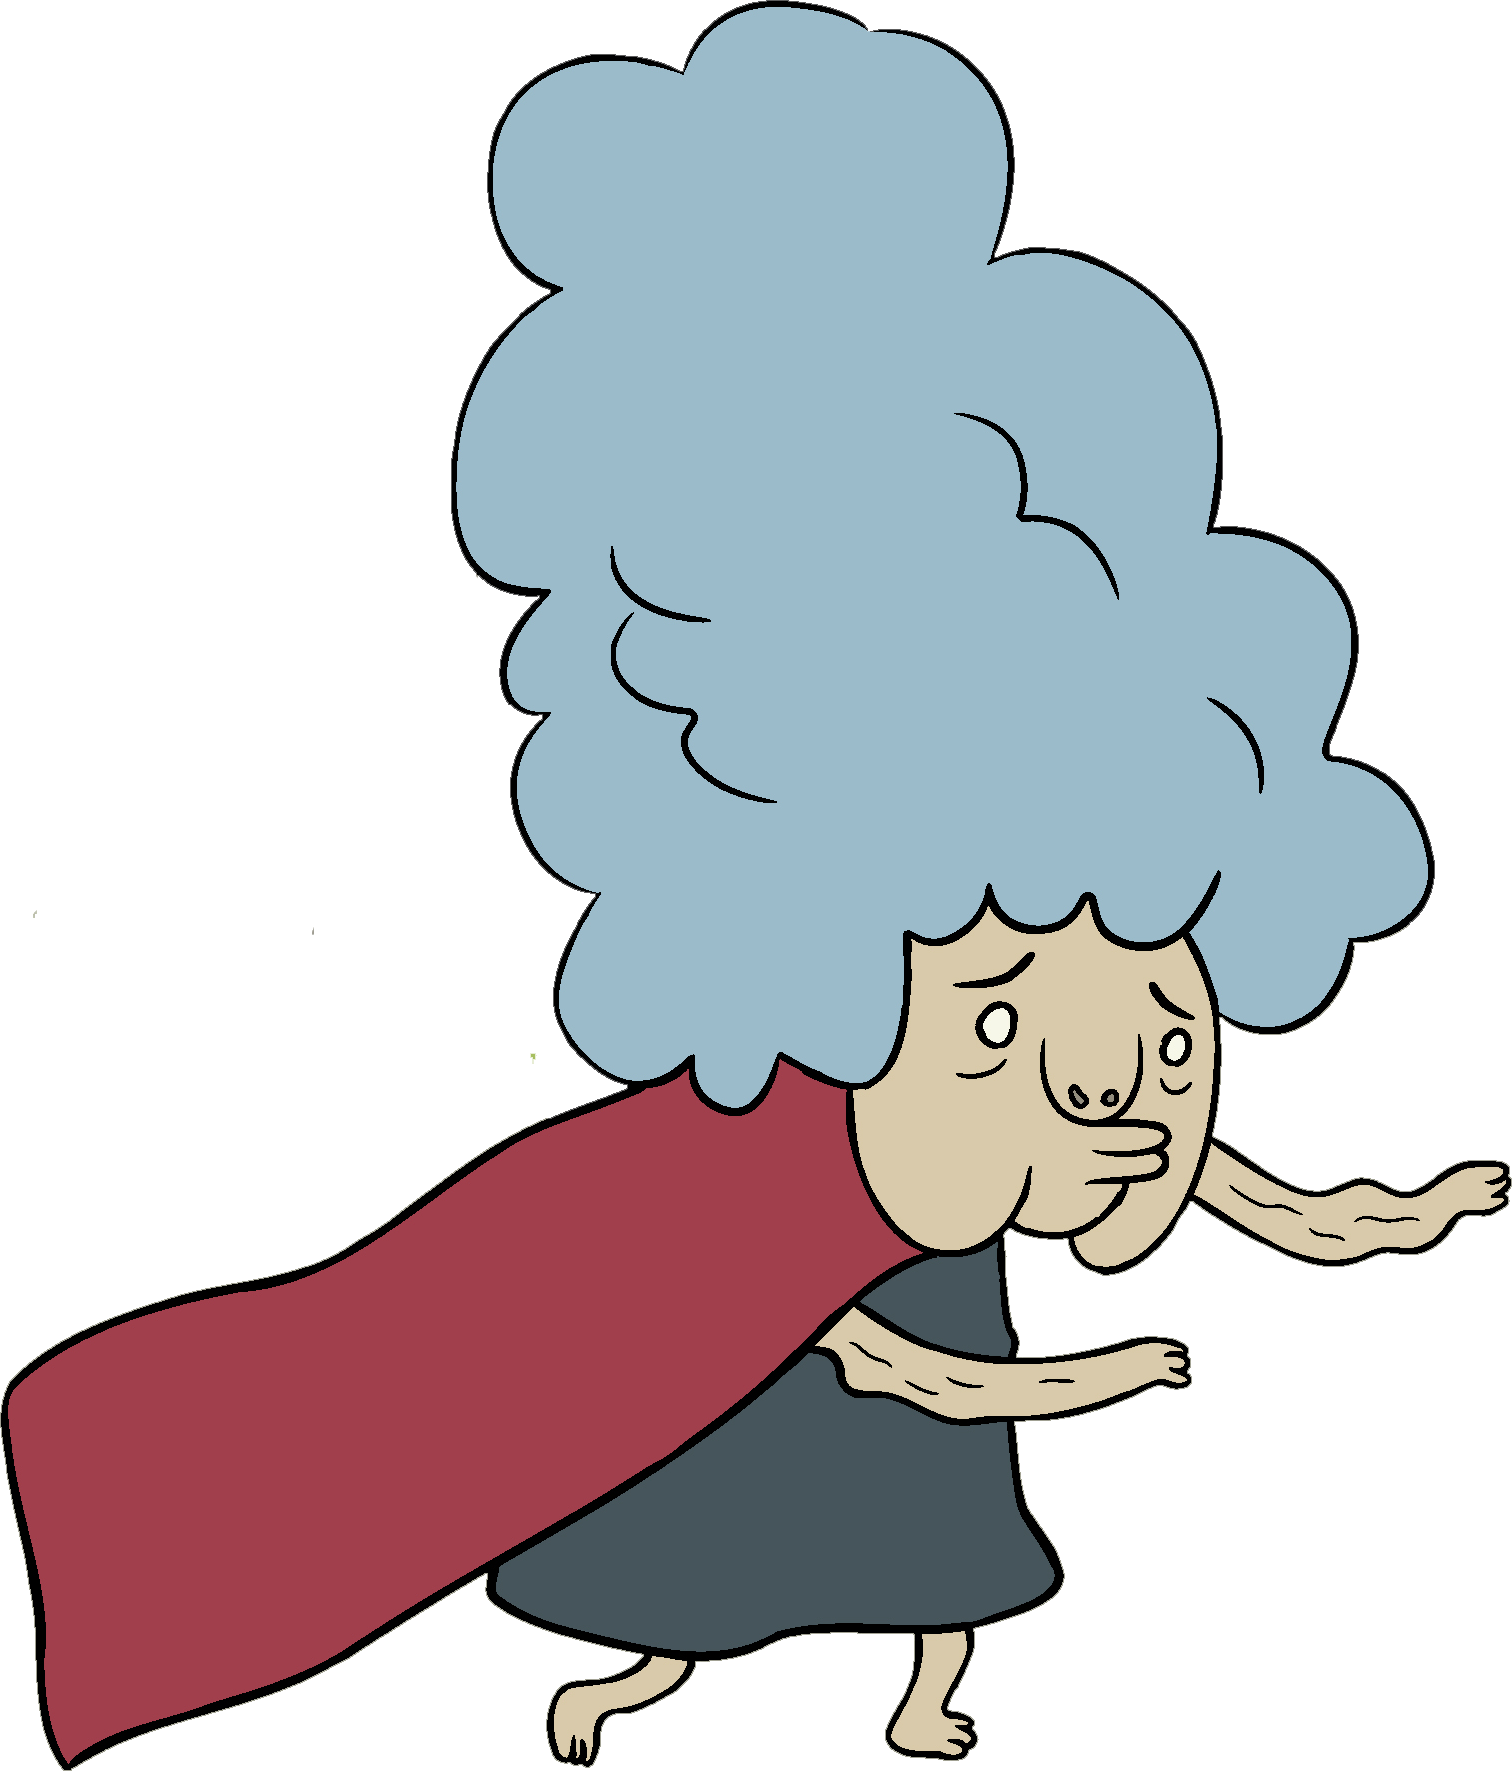 Free Old Lady Cartoon, Download Free Old Lady Cartoon png images, Free